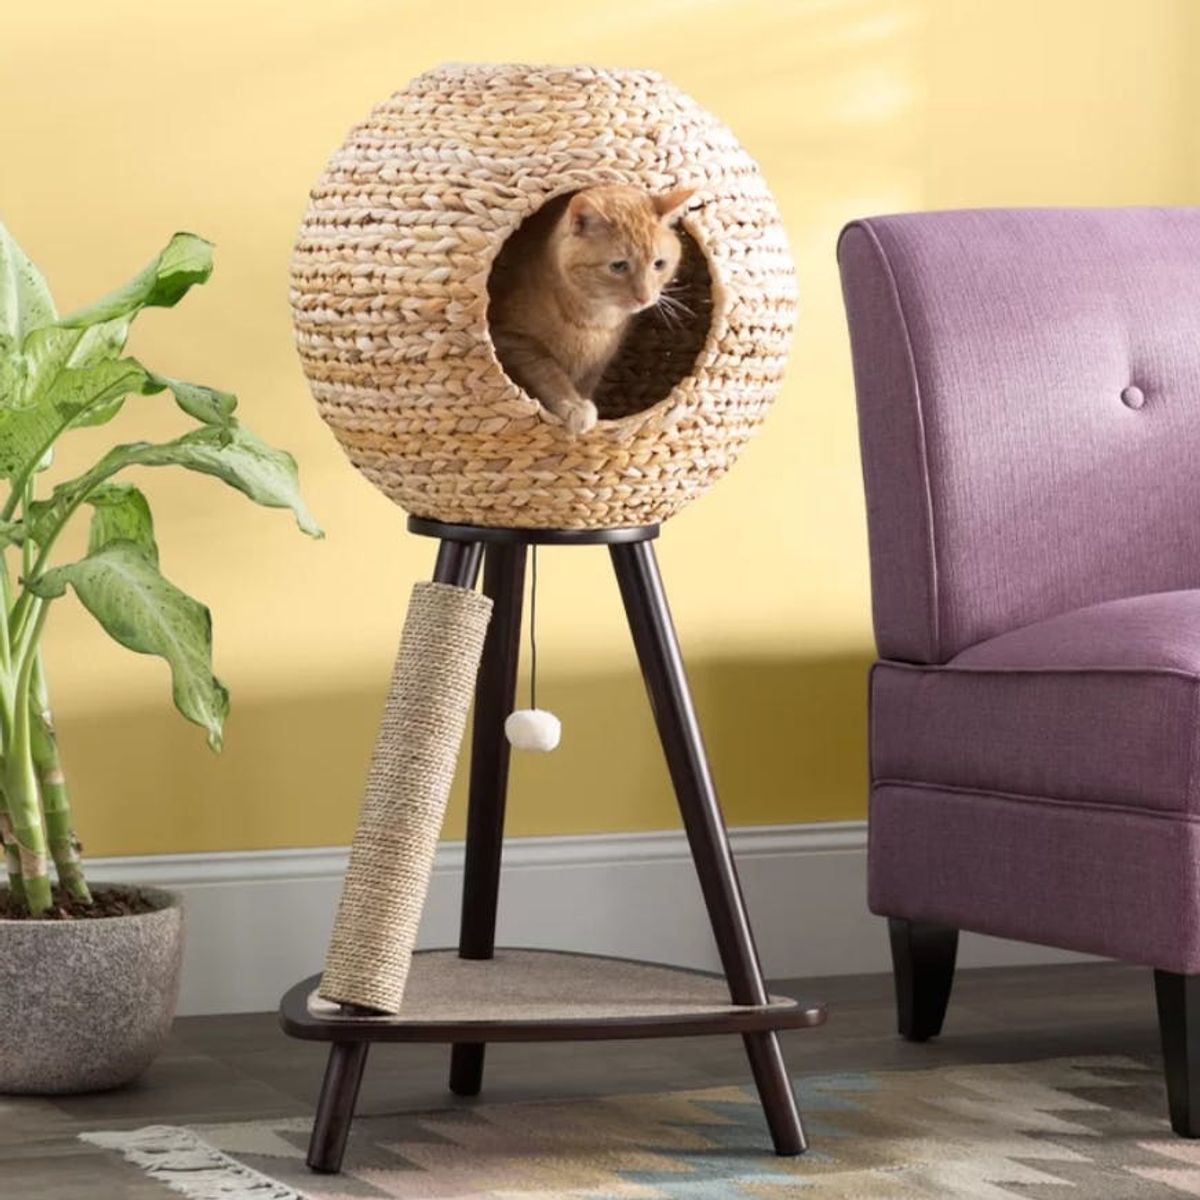 Wayfair’s New Pet Furniture Line Is Paws-itively Adorable